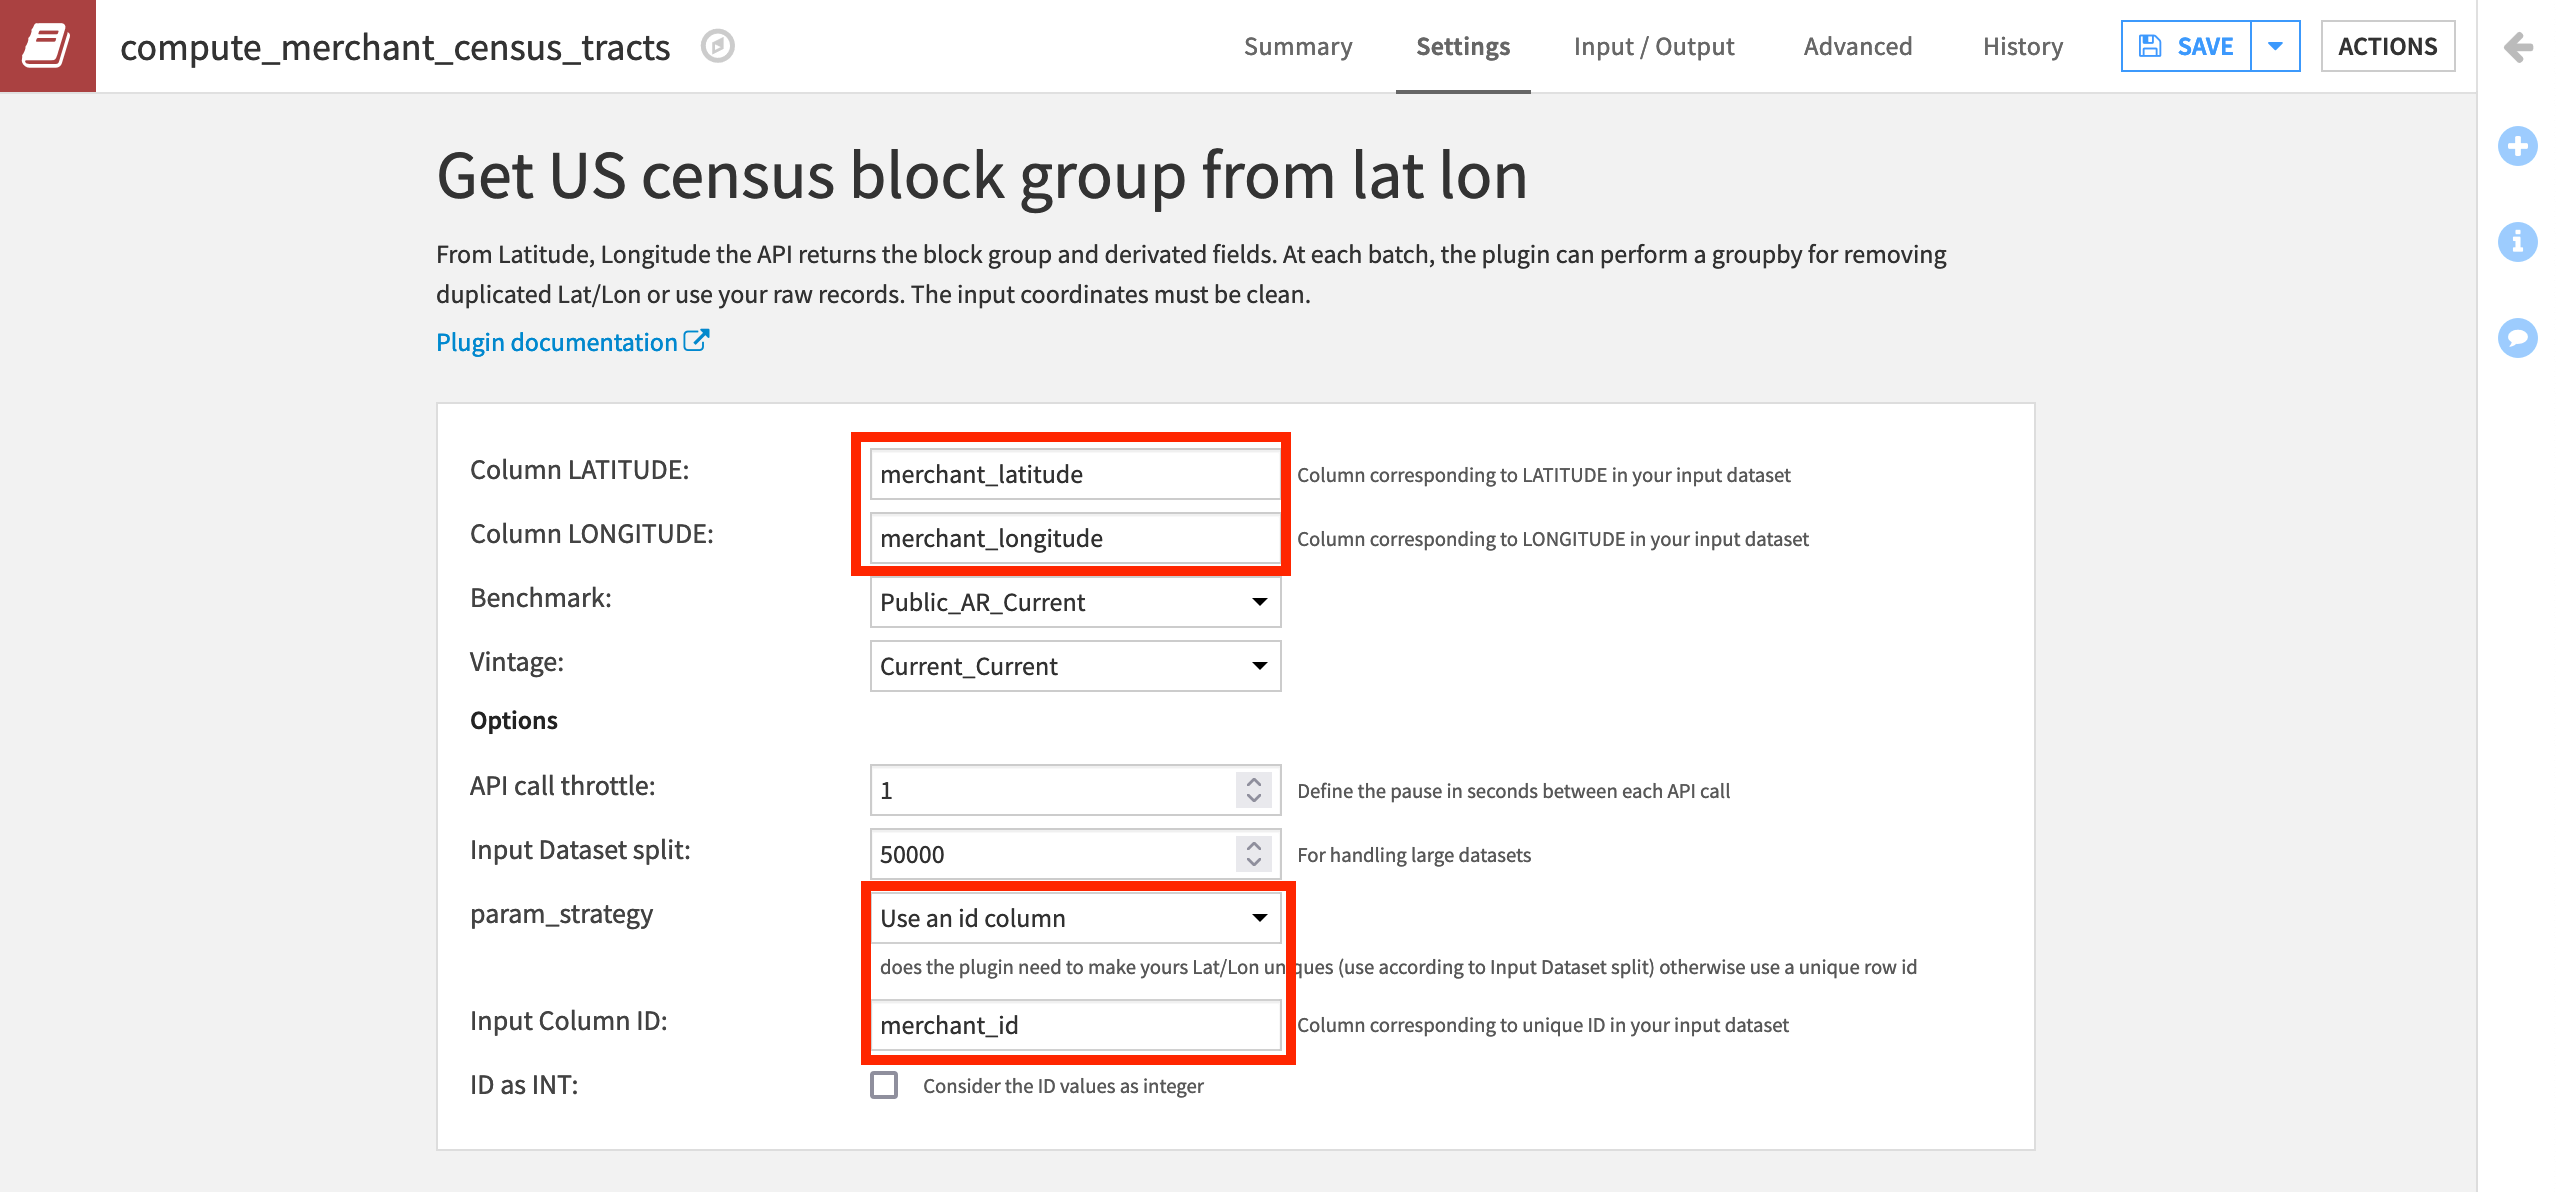 The settings page from the "Get US census block group from lat lon" recipe of the Dataiku plugin.